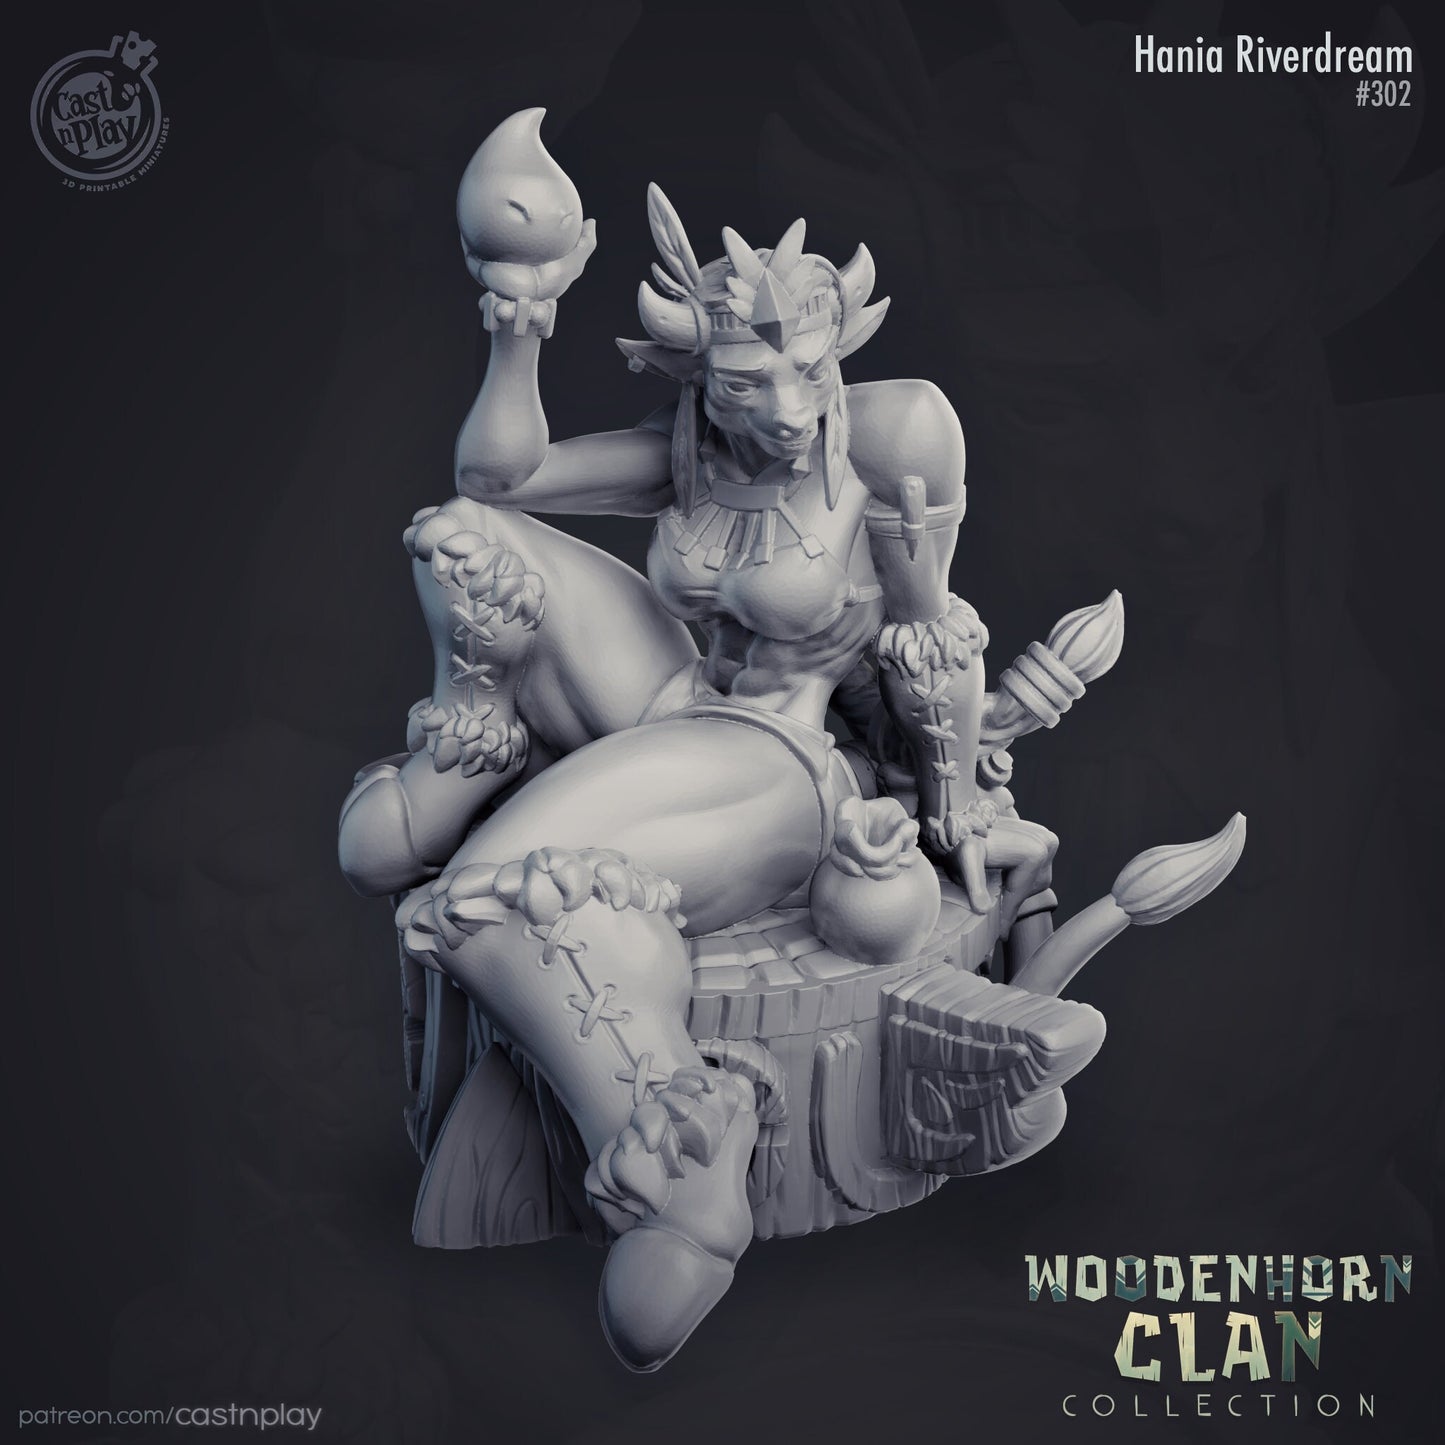 HANIA RIVERDREAM, by Cast n Play // 3D Print on Demand / D&D / Pathfinder / RPG